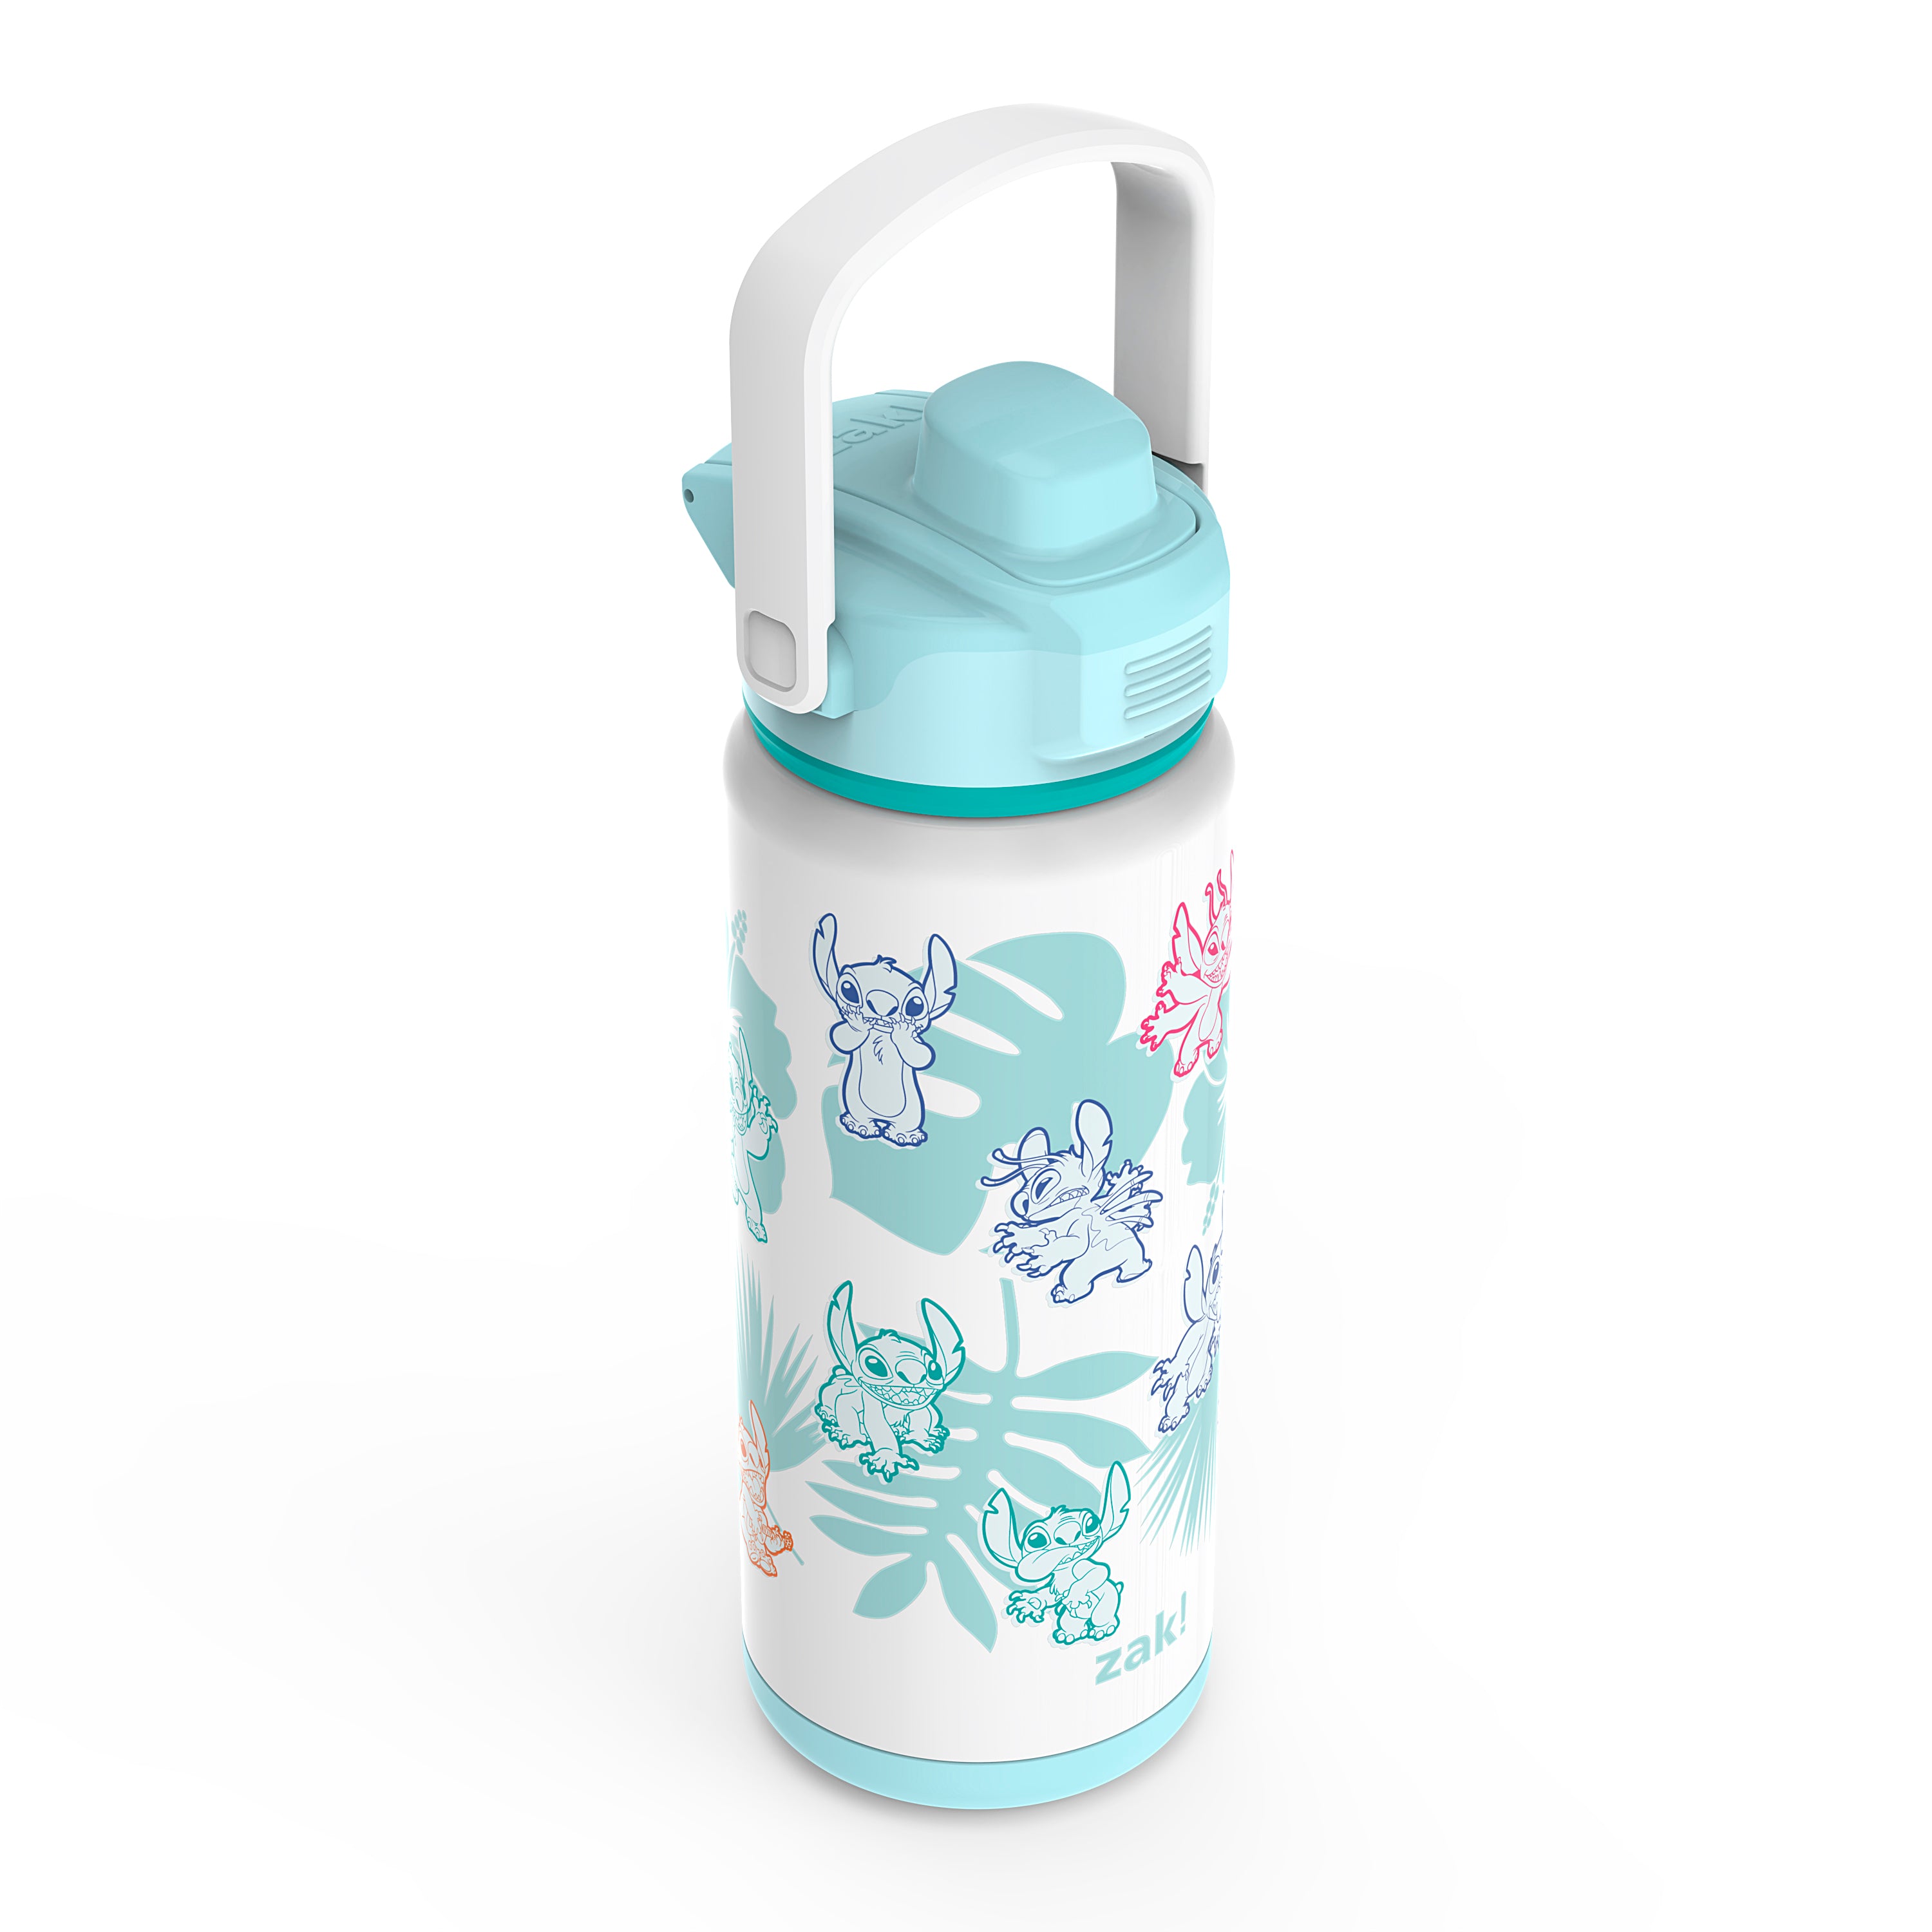 Disney Lilo & Stitch Beacon Stainless Steel Insulated Kids Water Bottle with Covered Spout, 20 Ounces